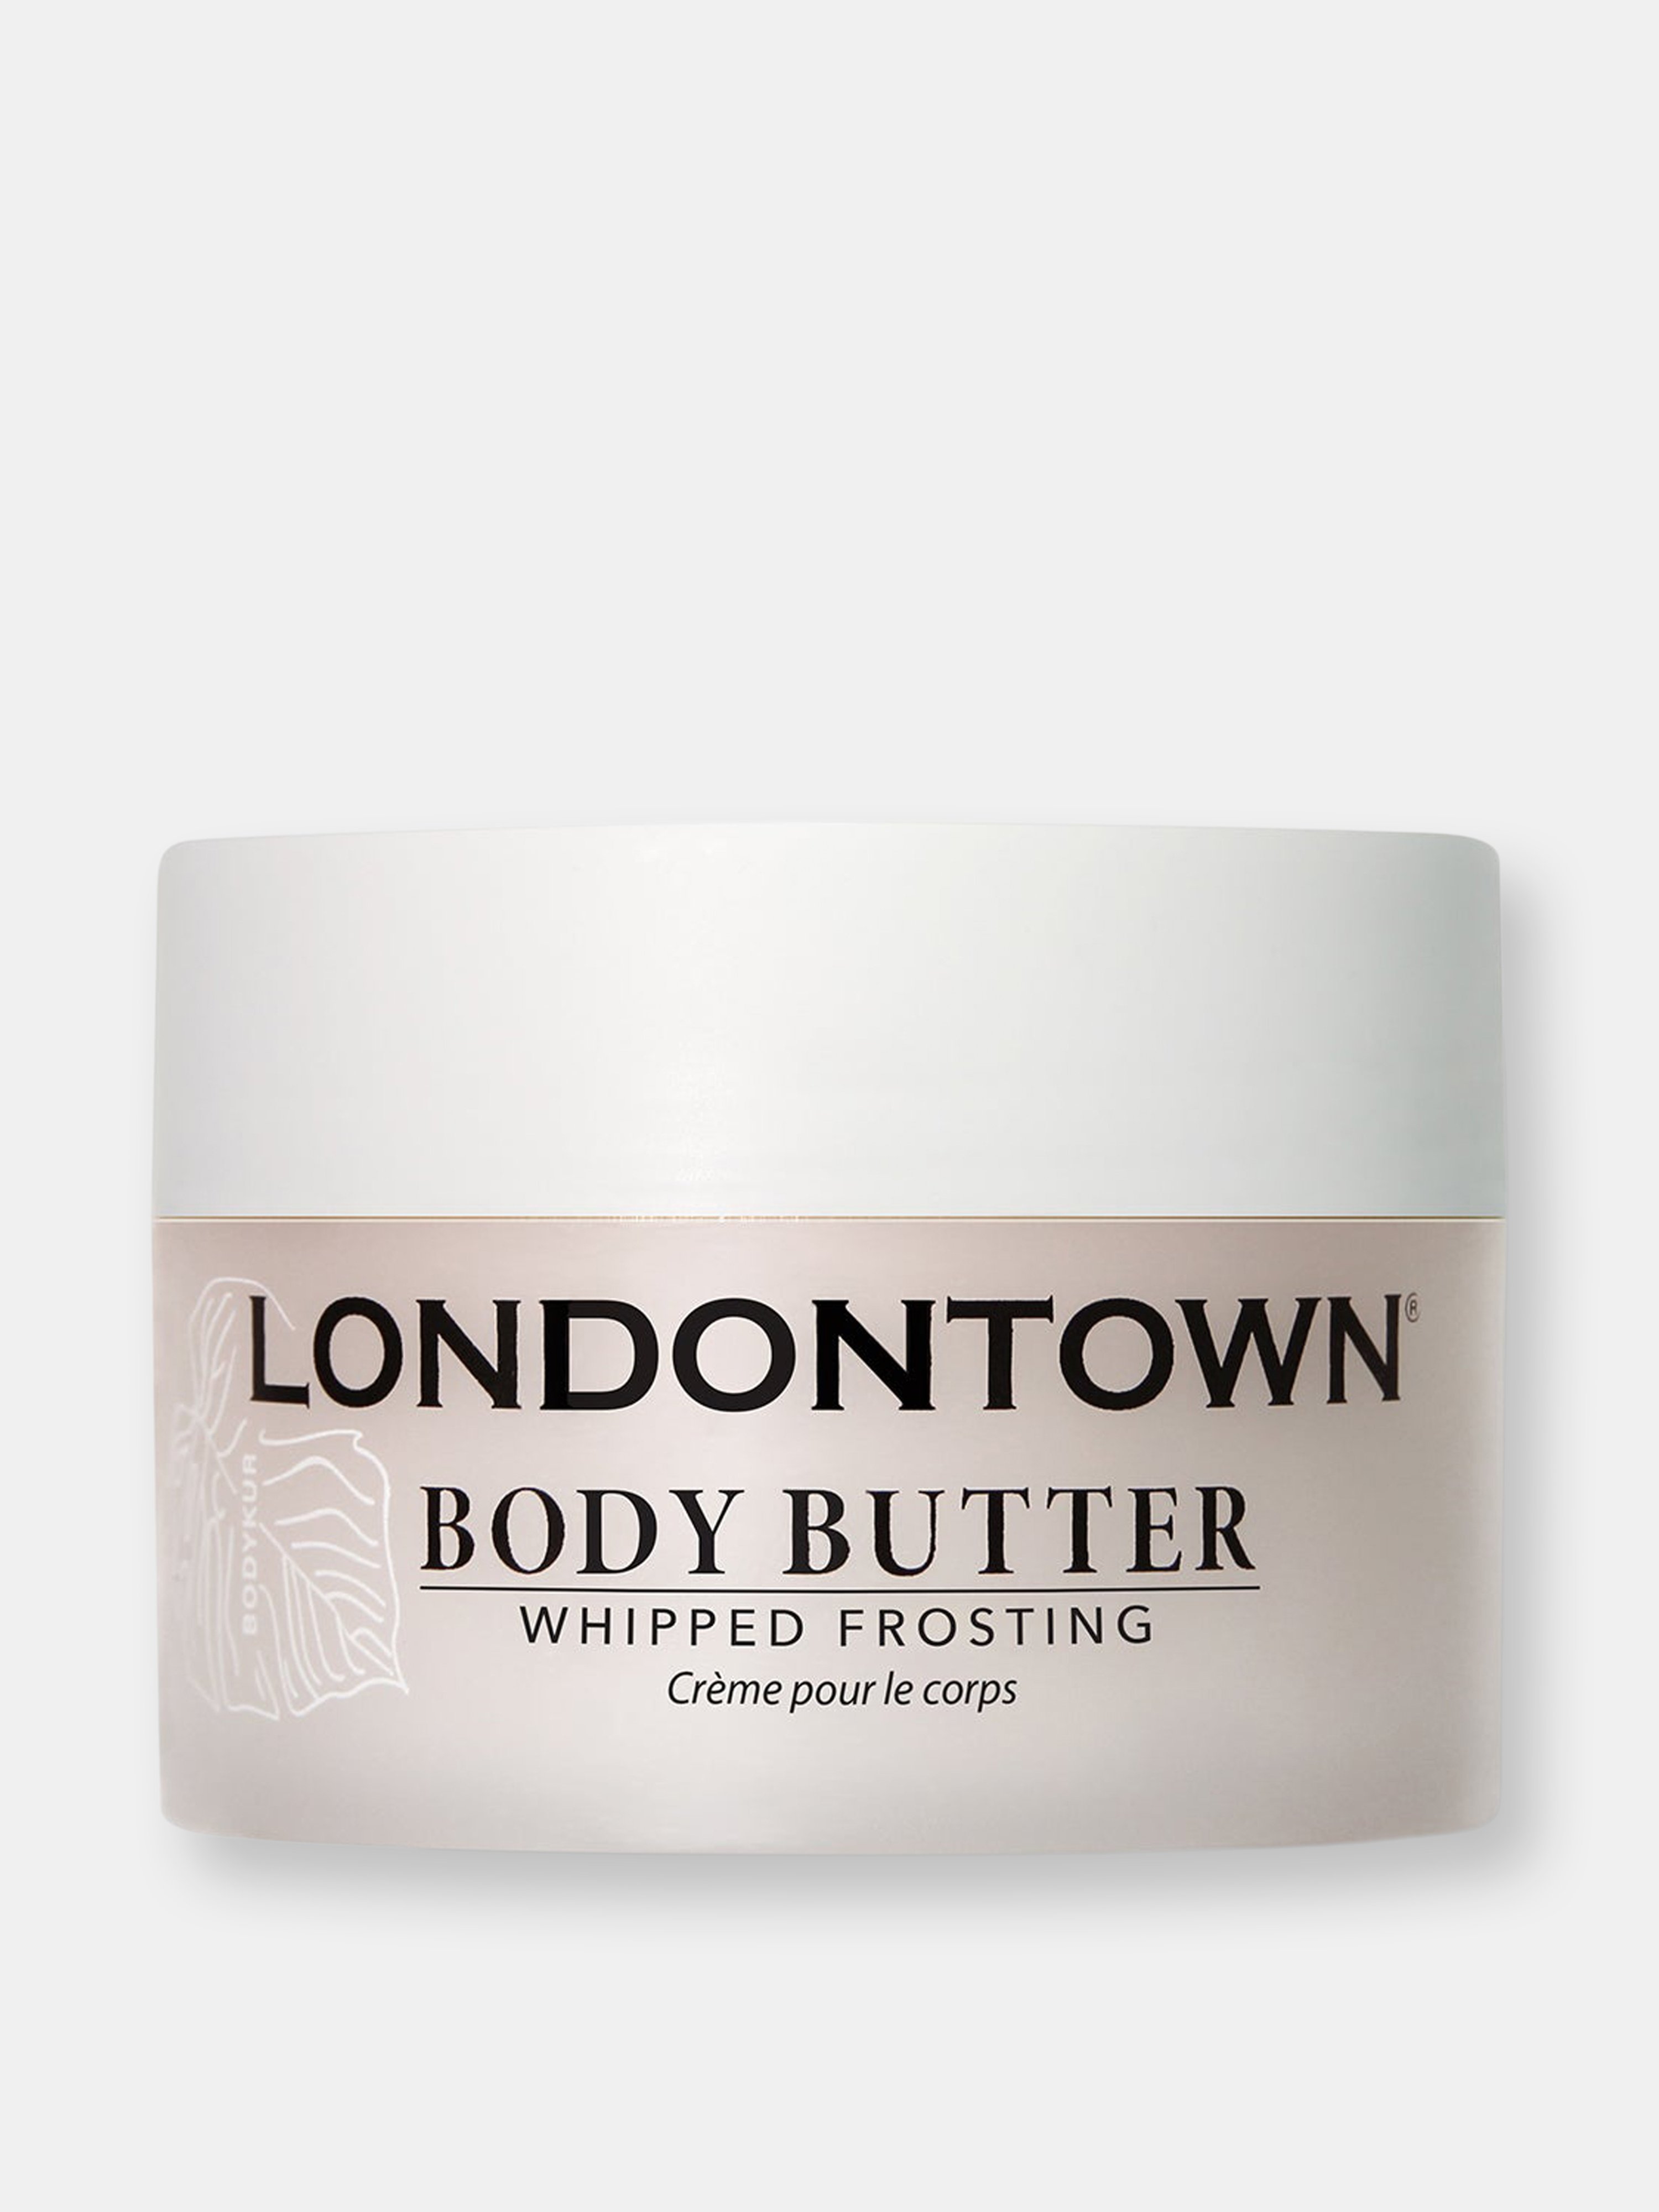 LONDONTOWN LONDONTOWN WHIPPED FROSTING BODY BUTTER